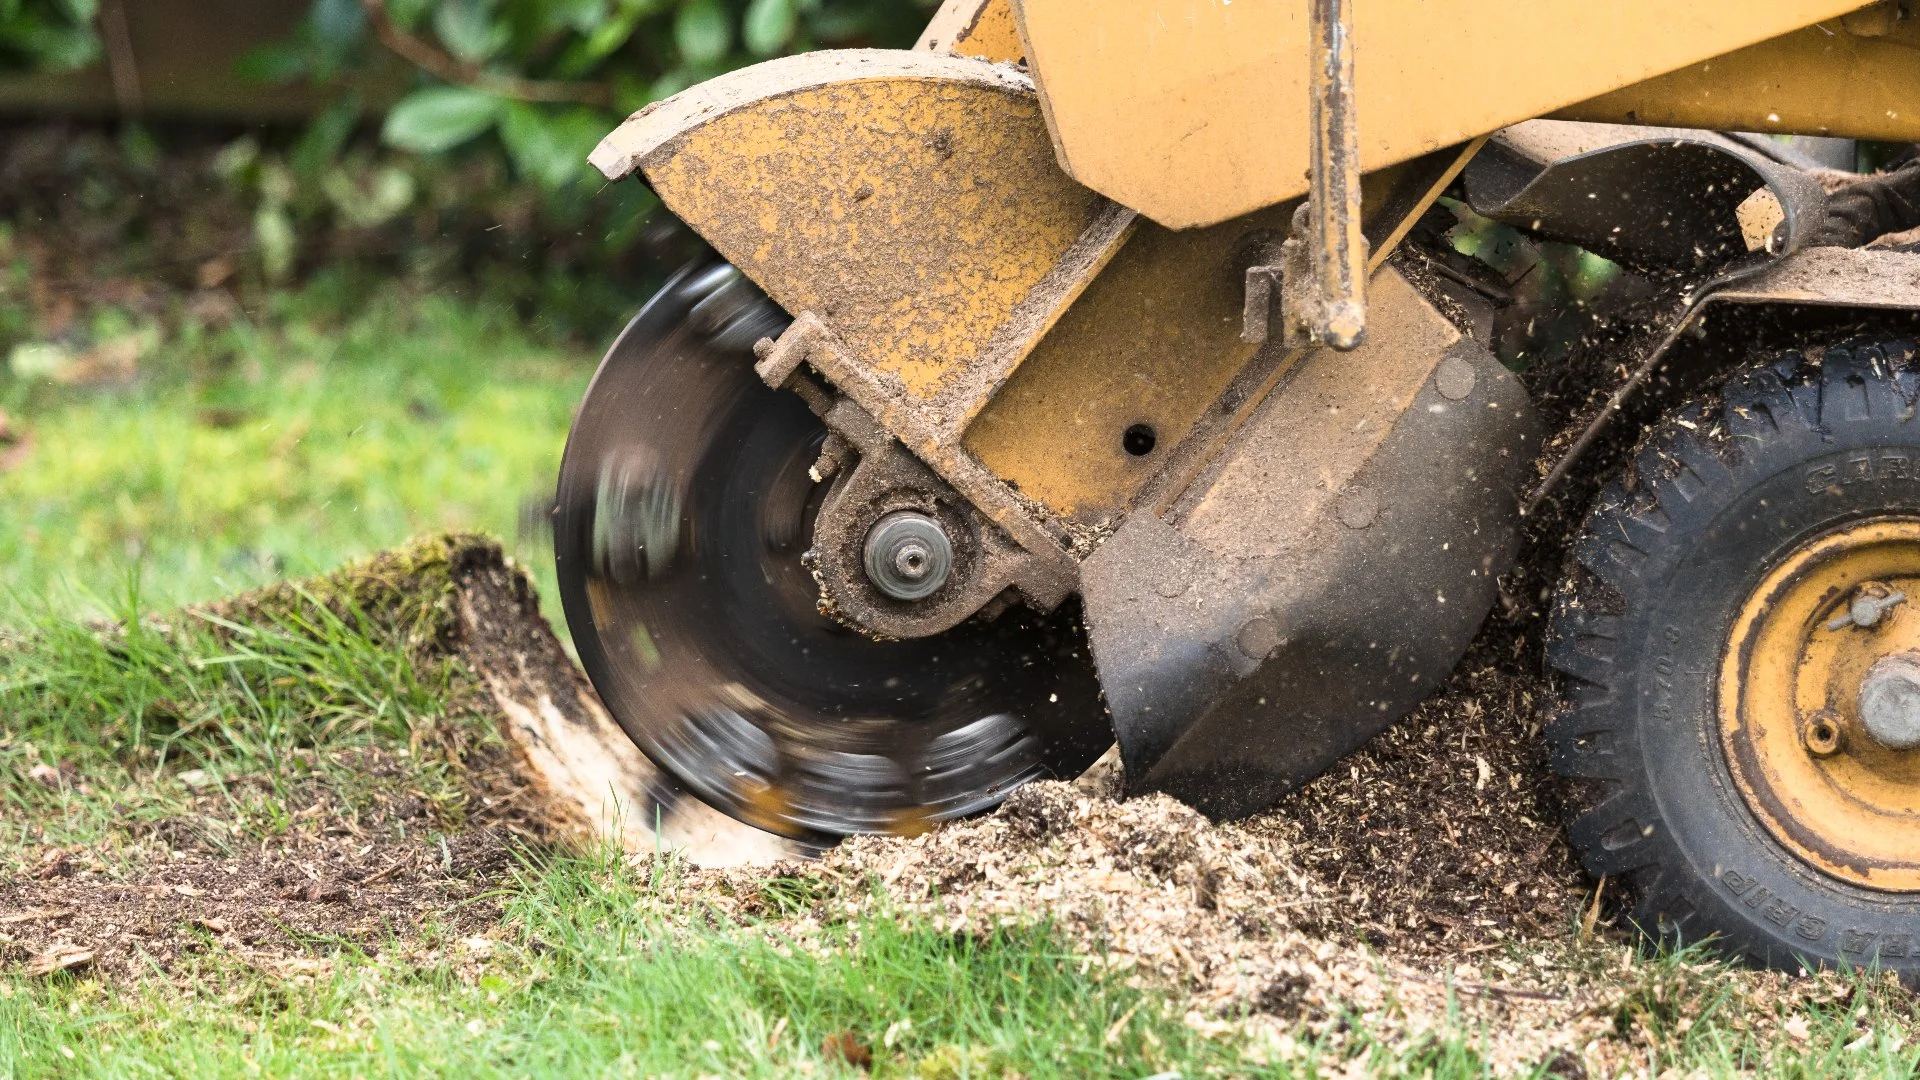 How Much Does Professional Tree Stump Grinding Cost?